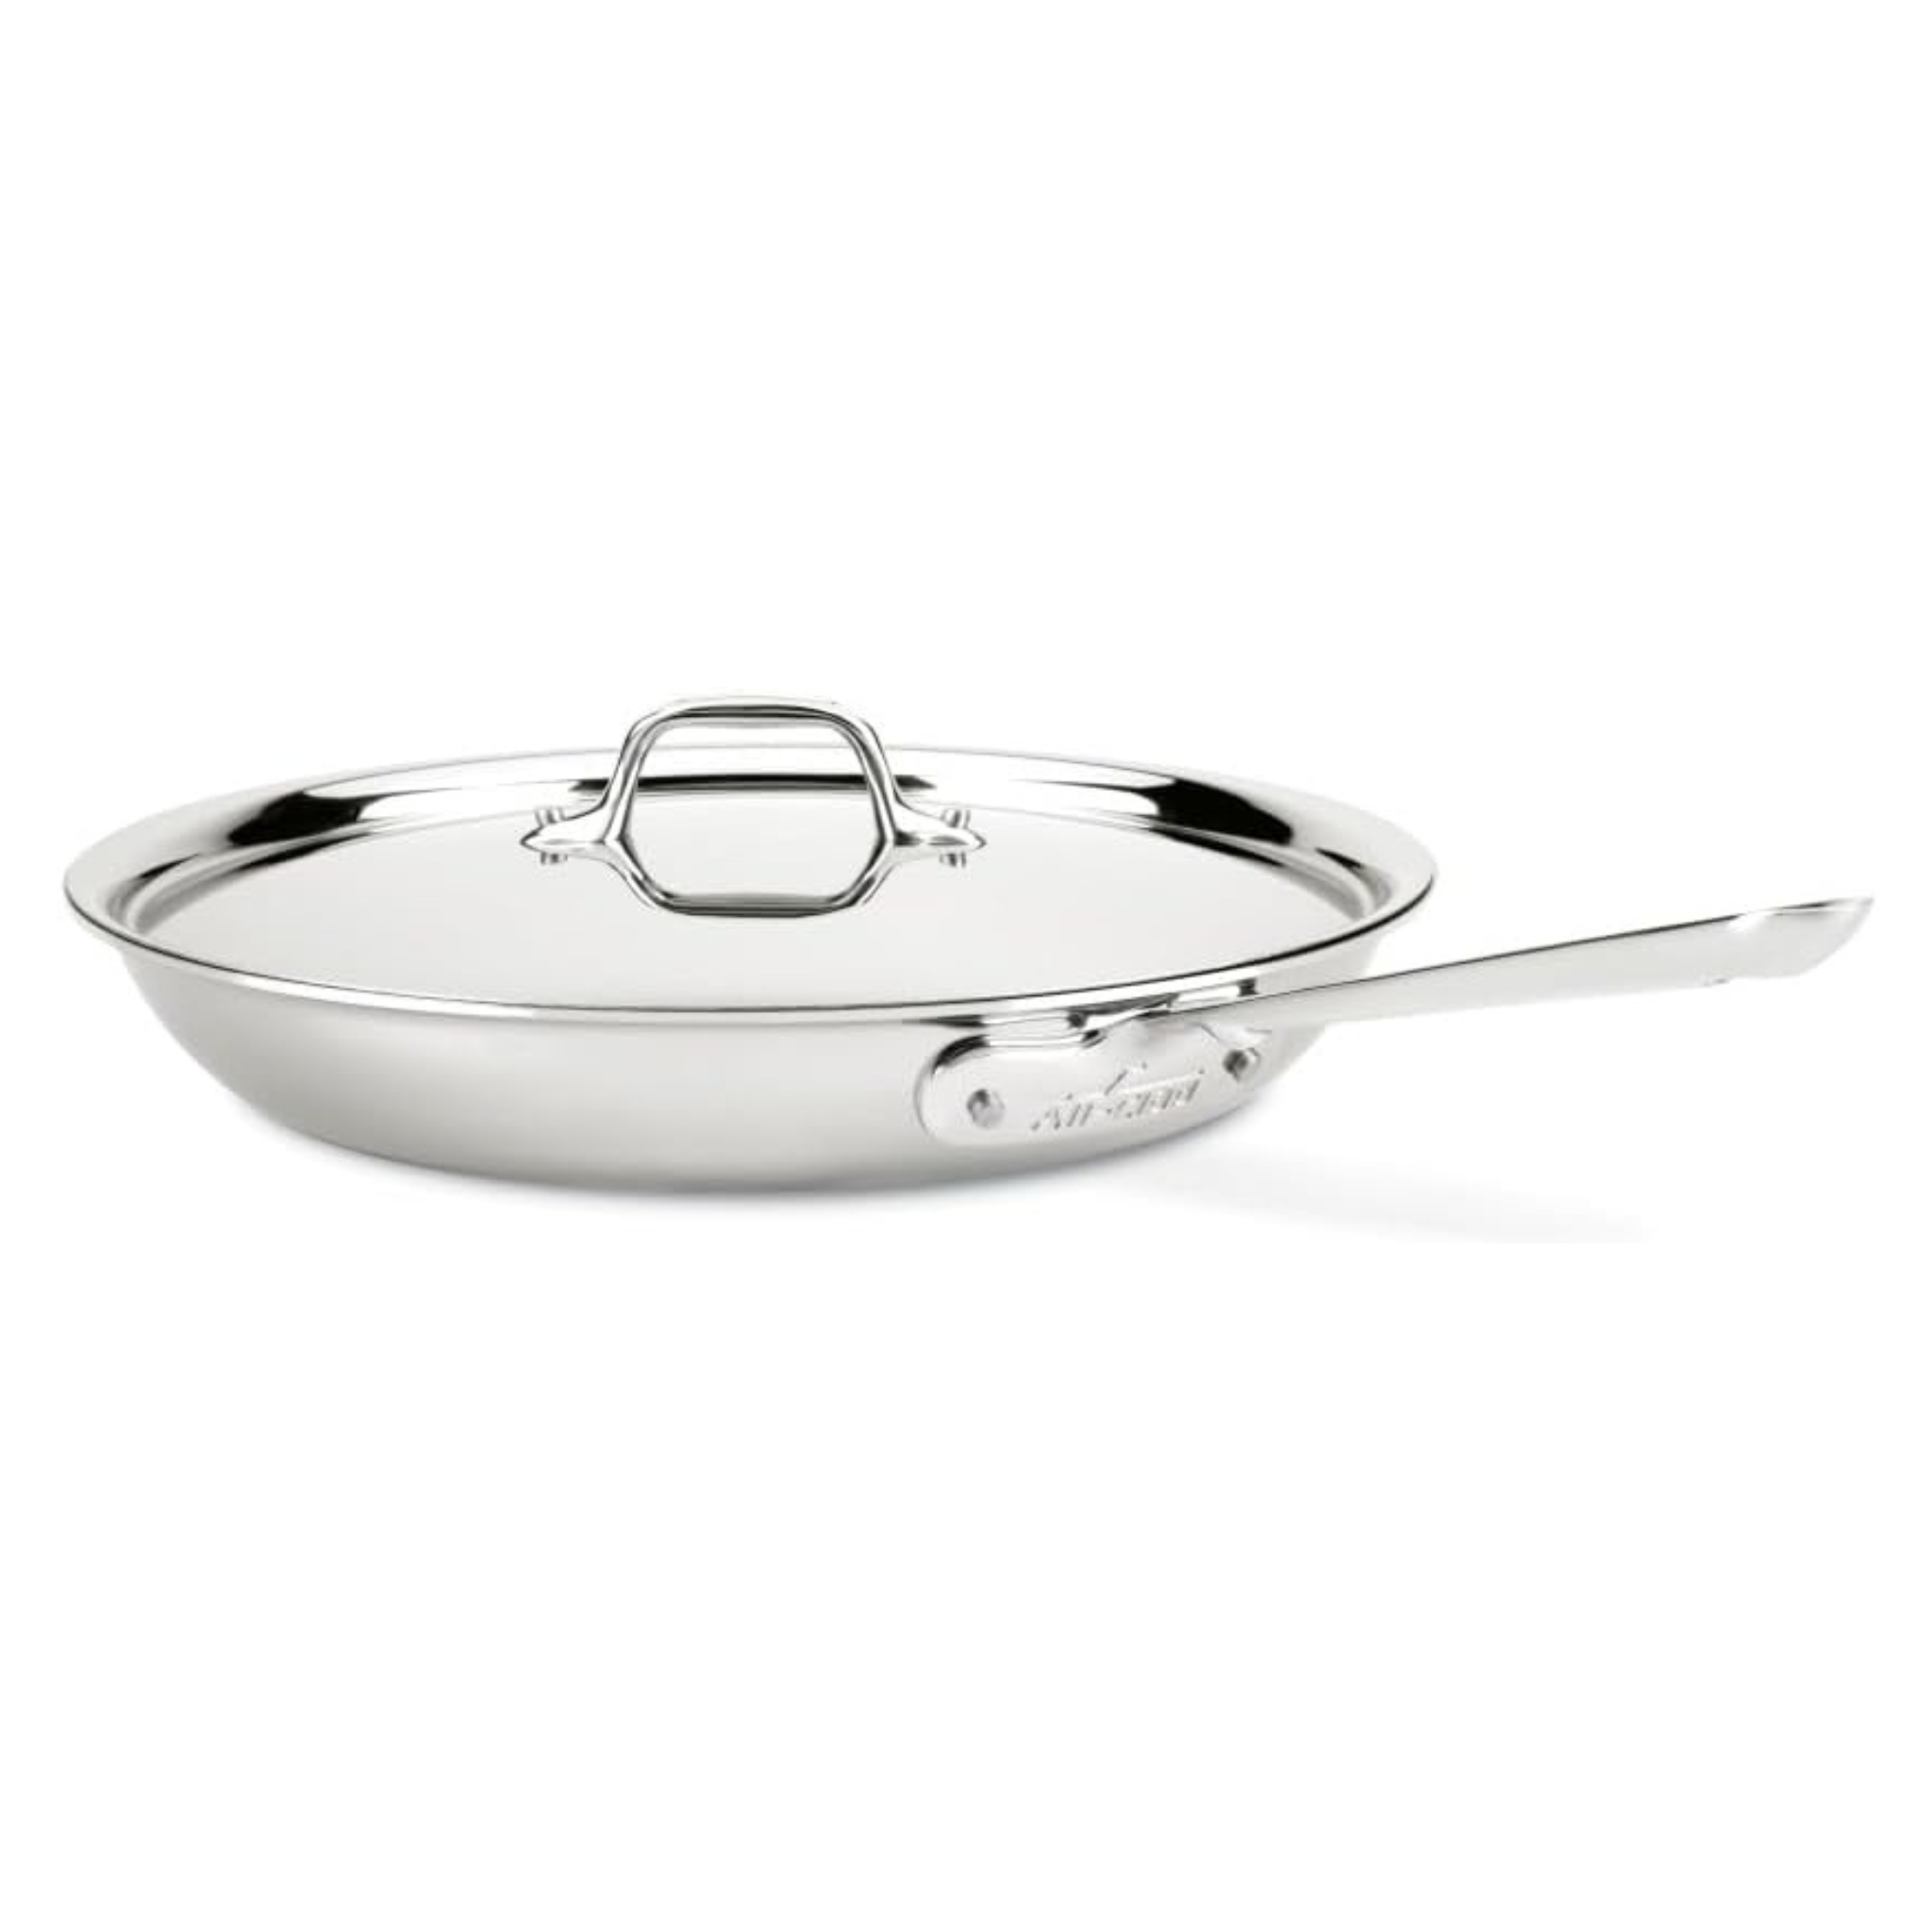 All-Clad D3 3-Ply Stainless Steel 12-Inch Fry Pan with Lid